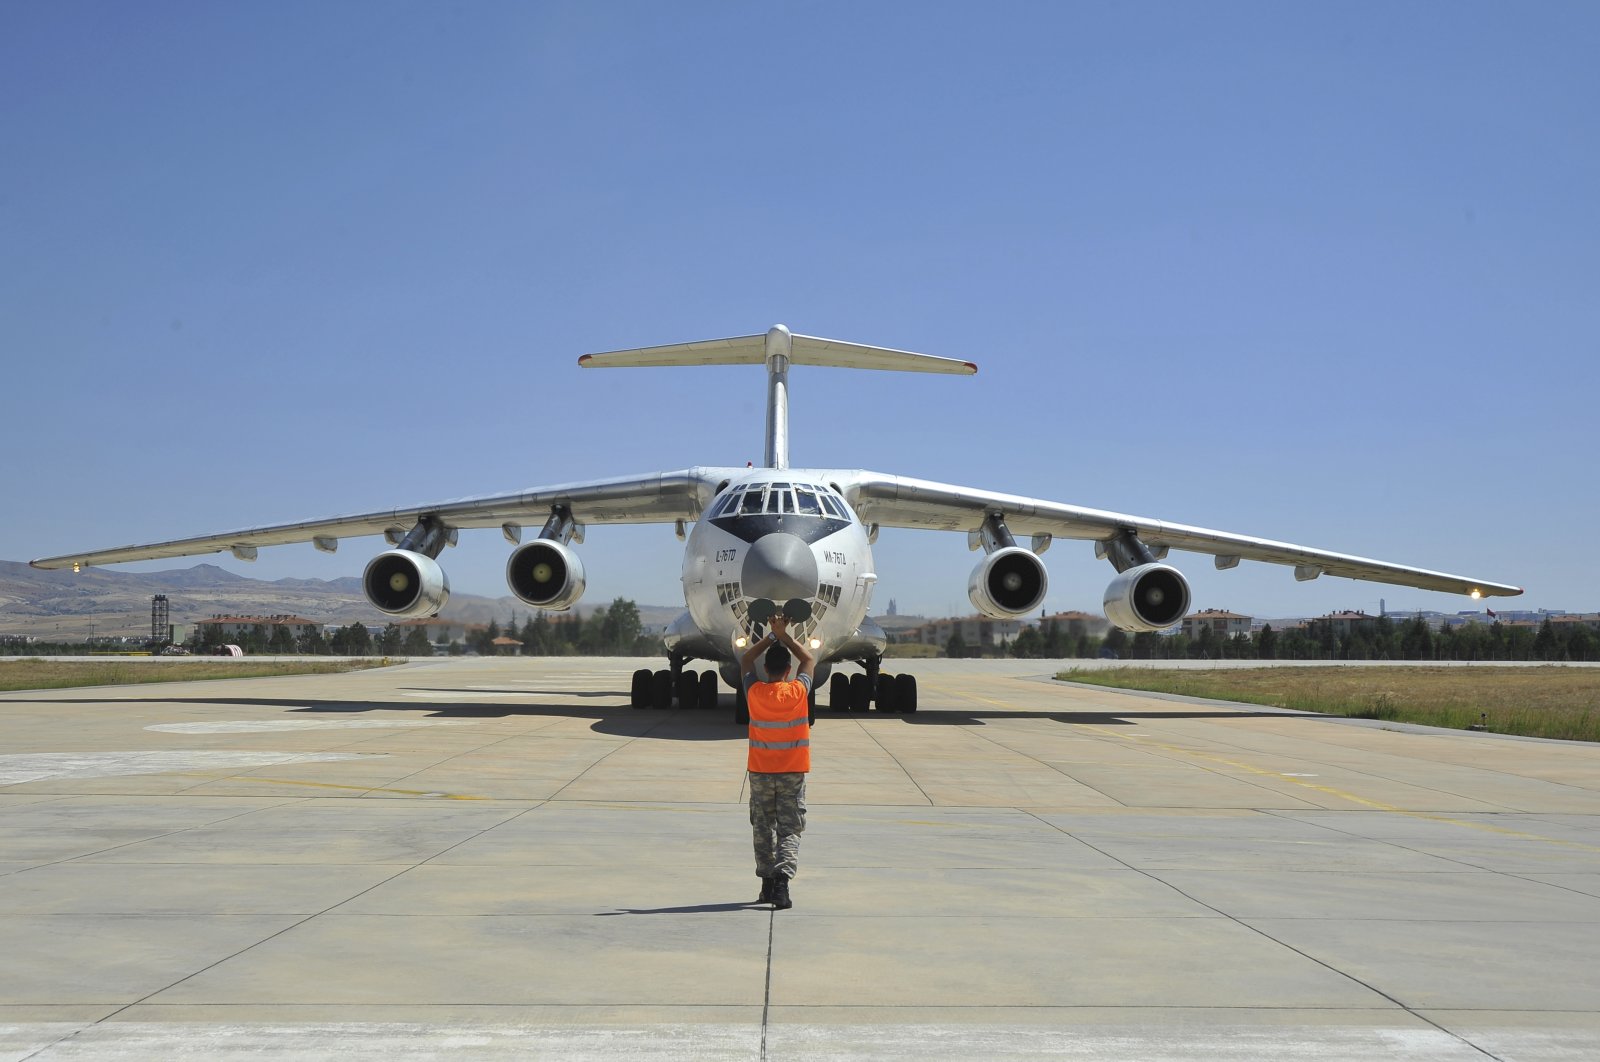 A Russian transport aircraft, carrying parts of the S-400 air defense systems, lands at Mürted Air Base near the capital Ankara, Turkey, Aug. 27, 2019. (AP Photo)